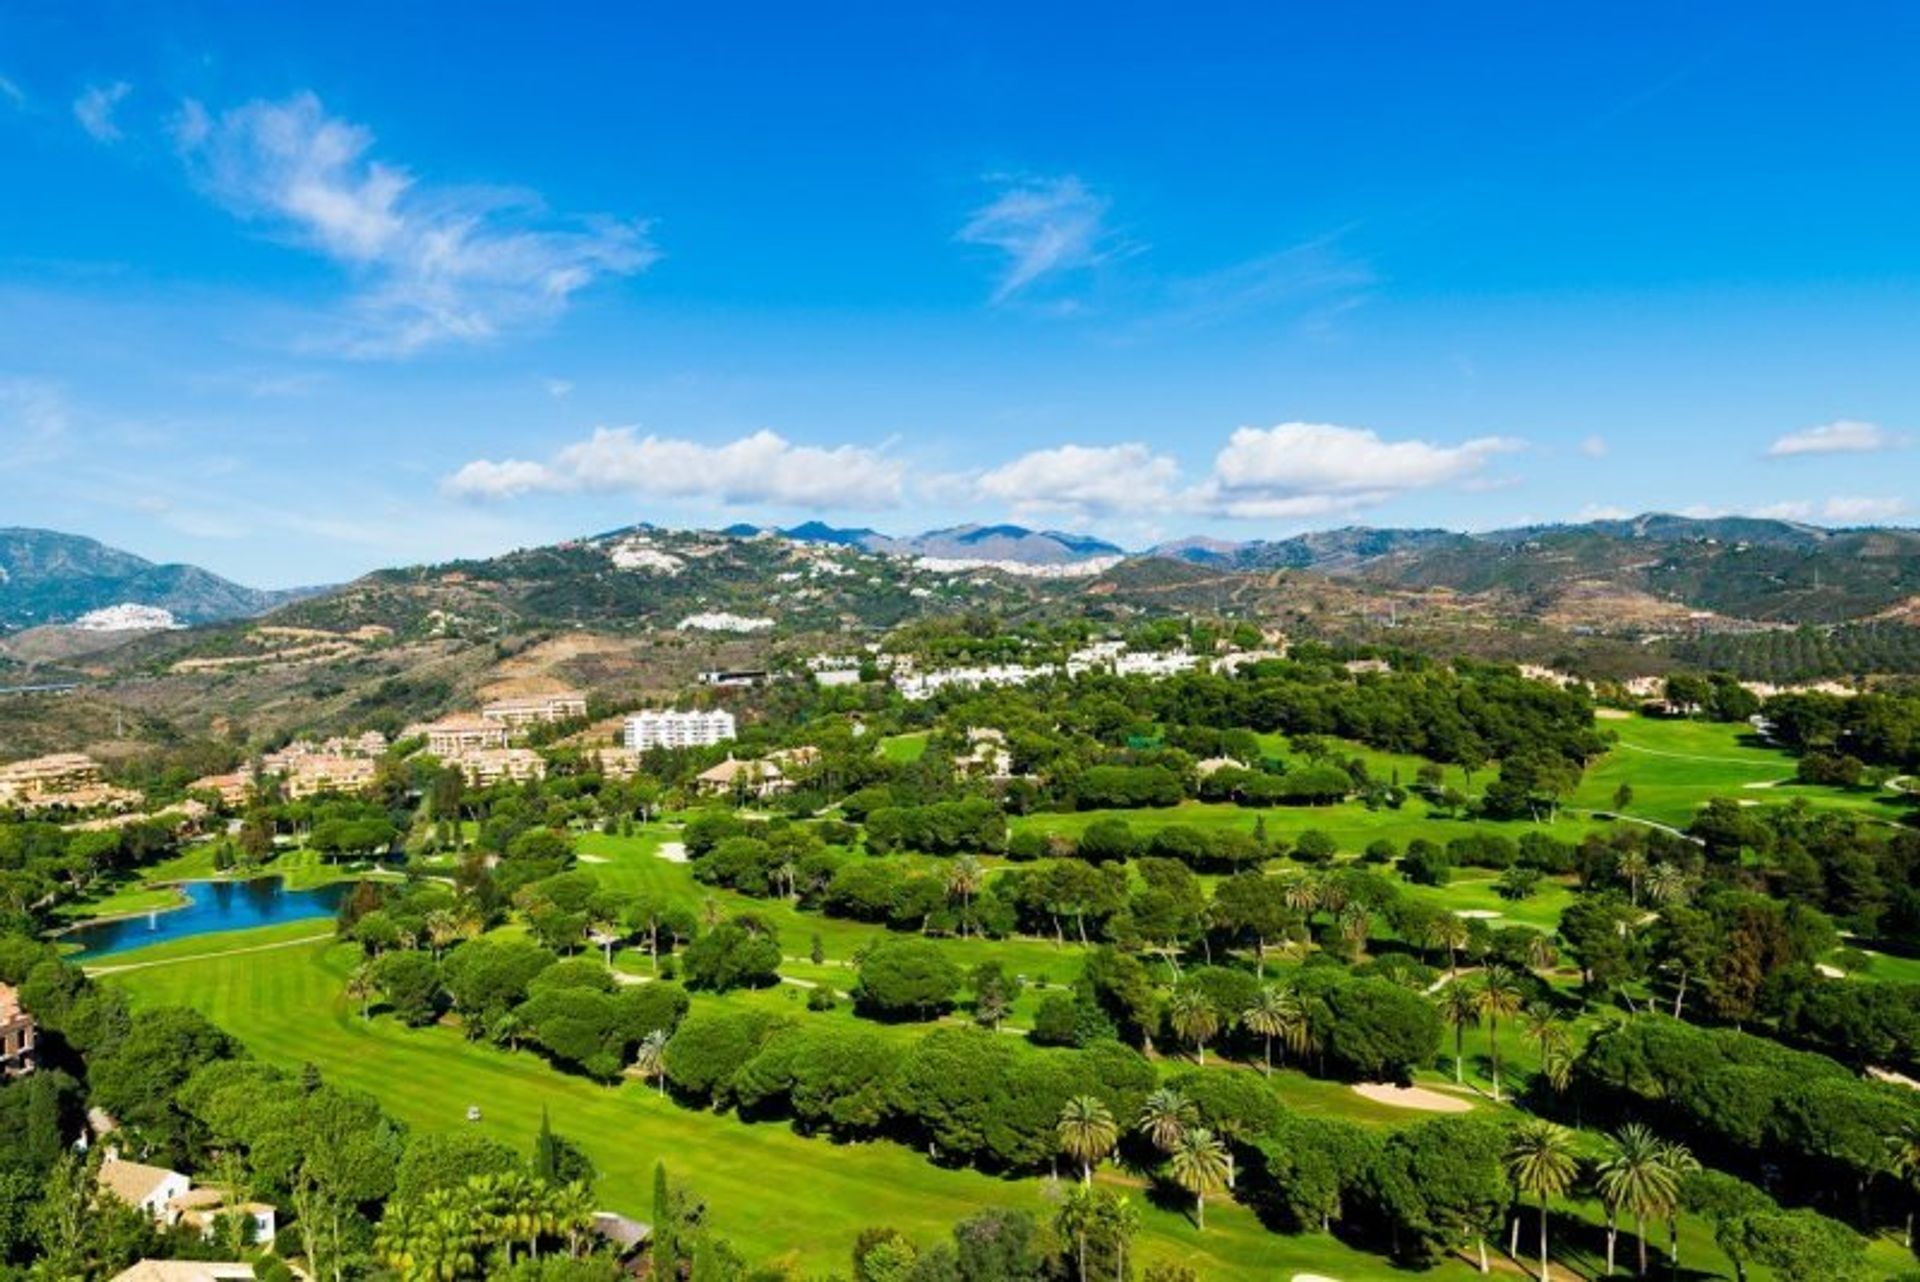 Take in sweeping views of the lush green landscape surrounding luxurious Marbella